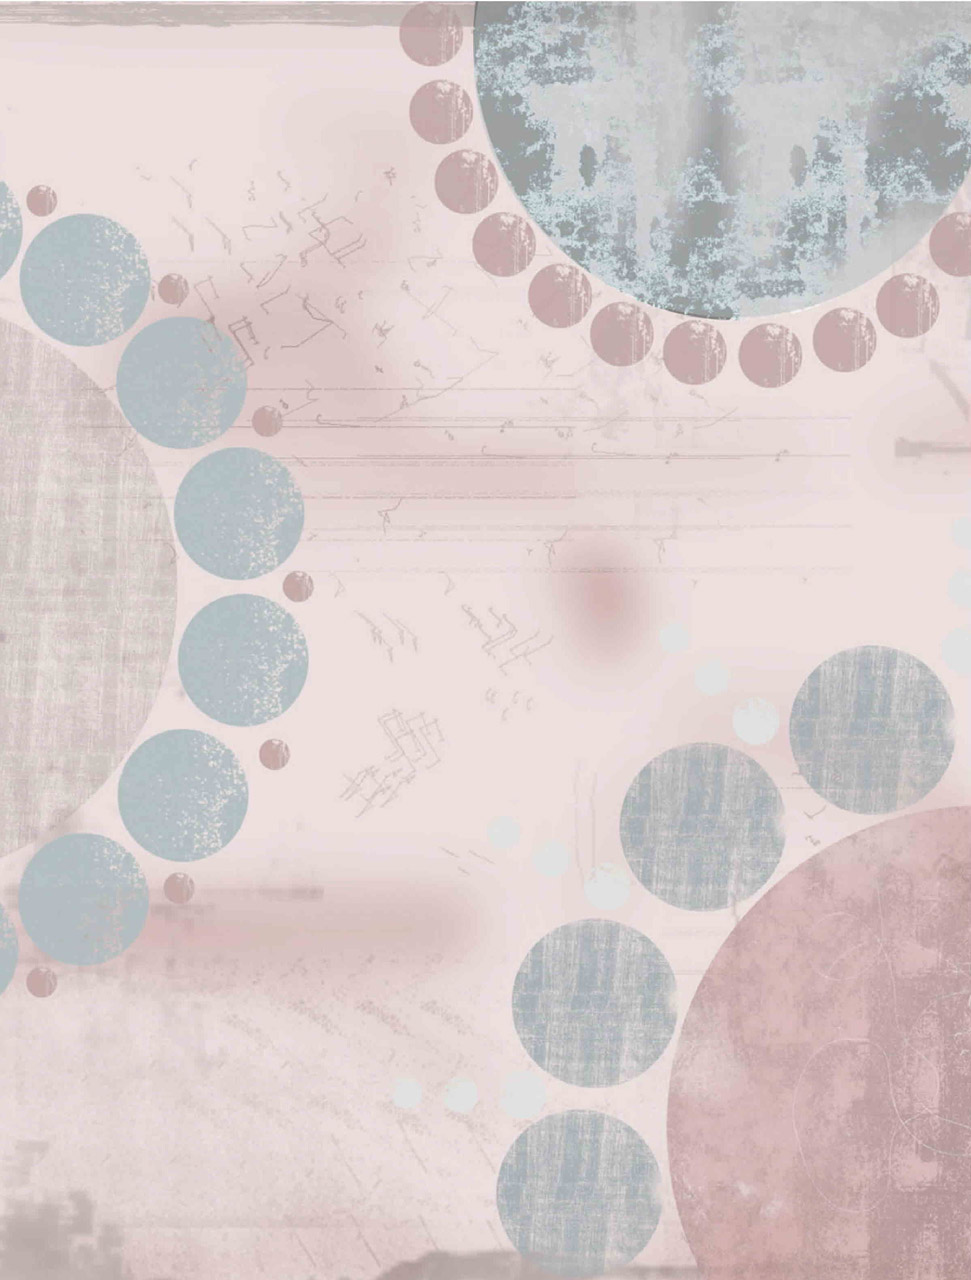 a background with a grunge pink and gray circles